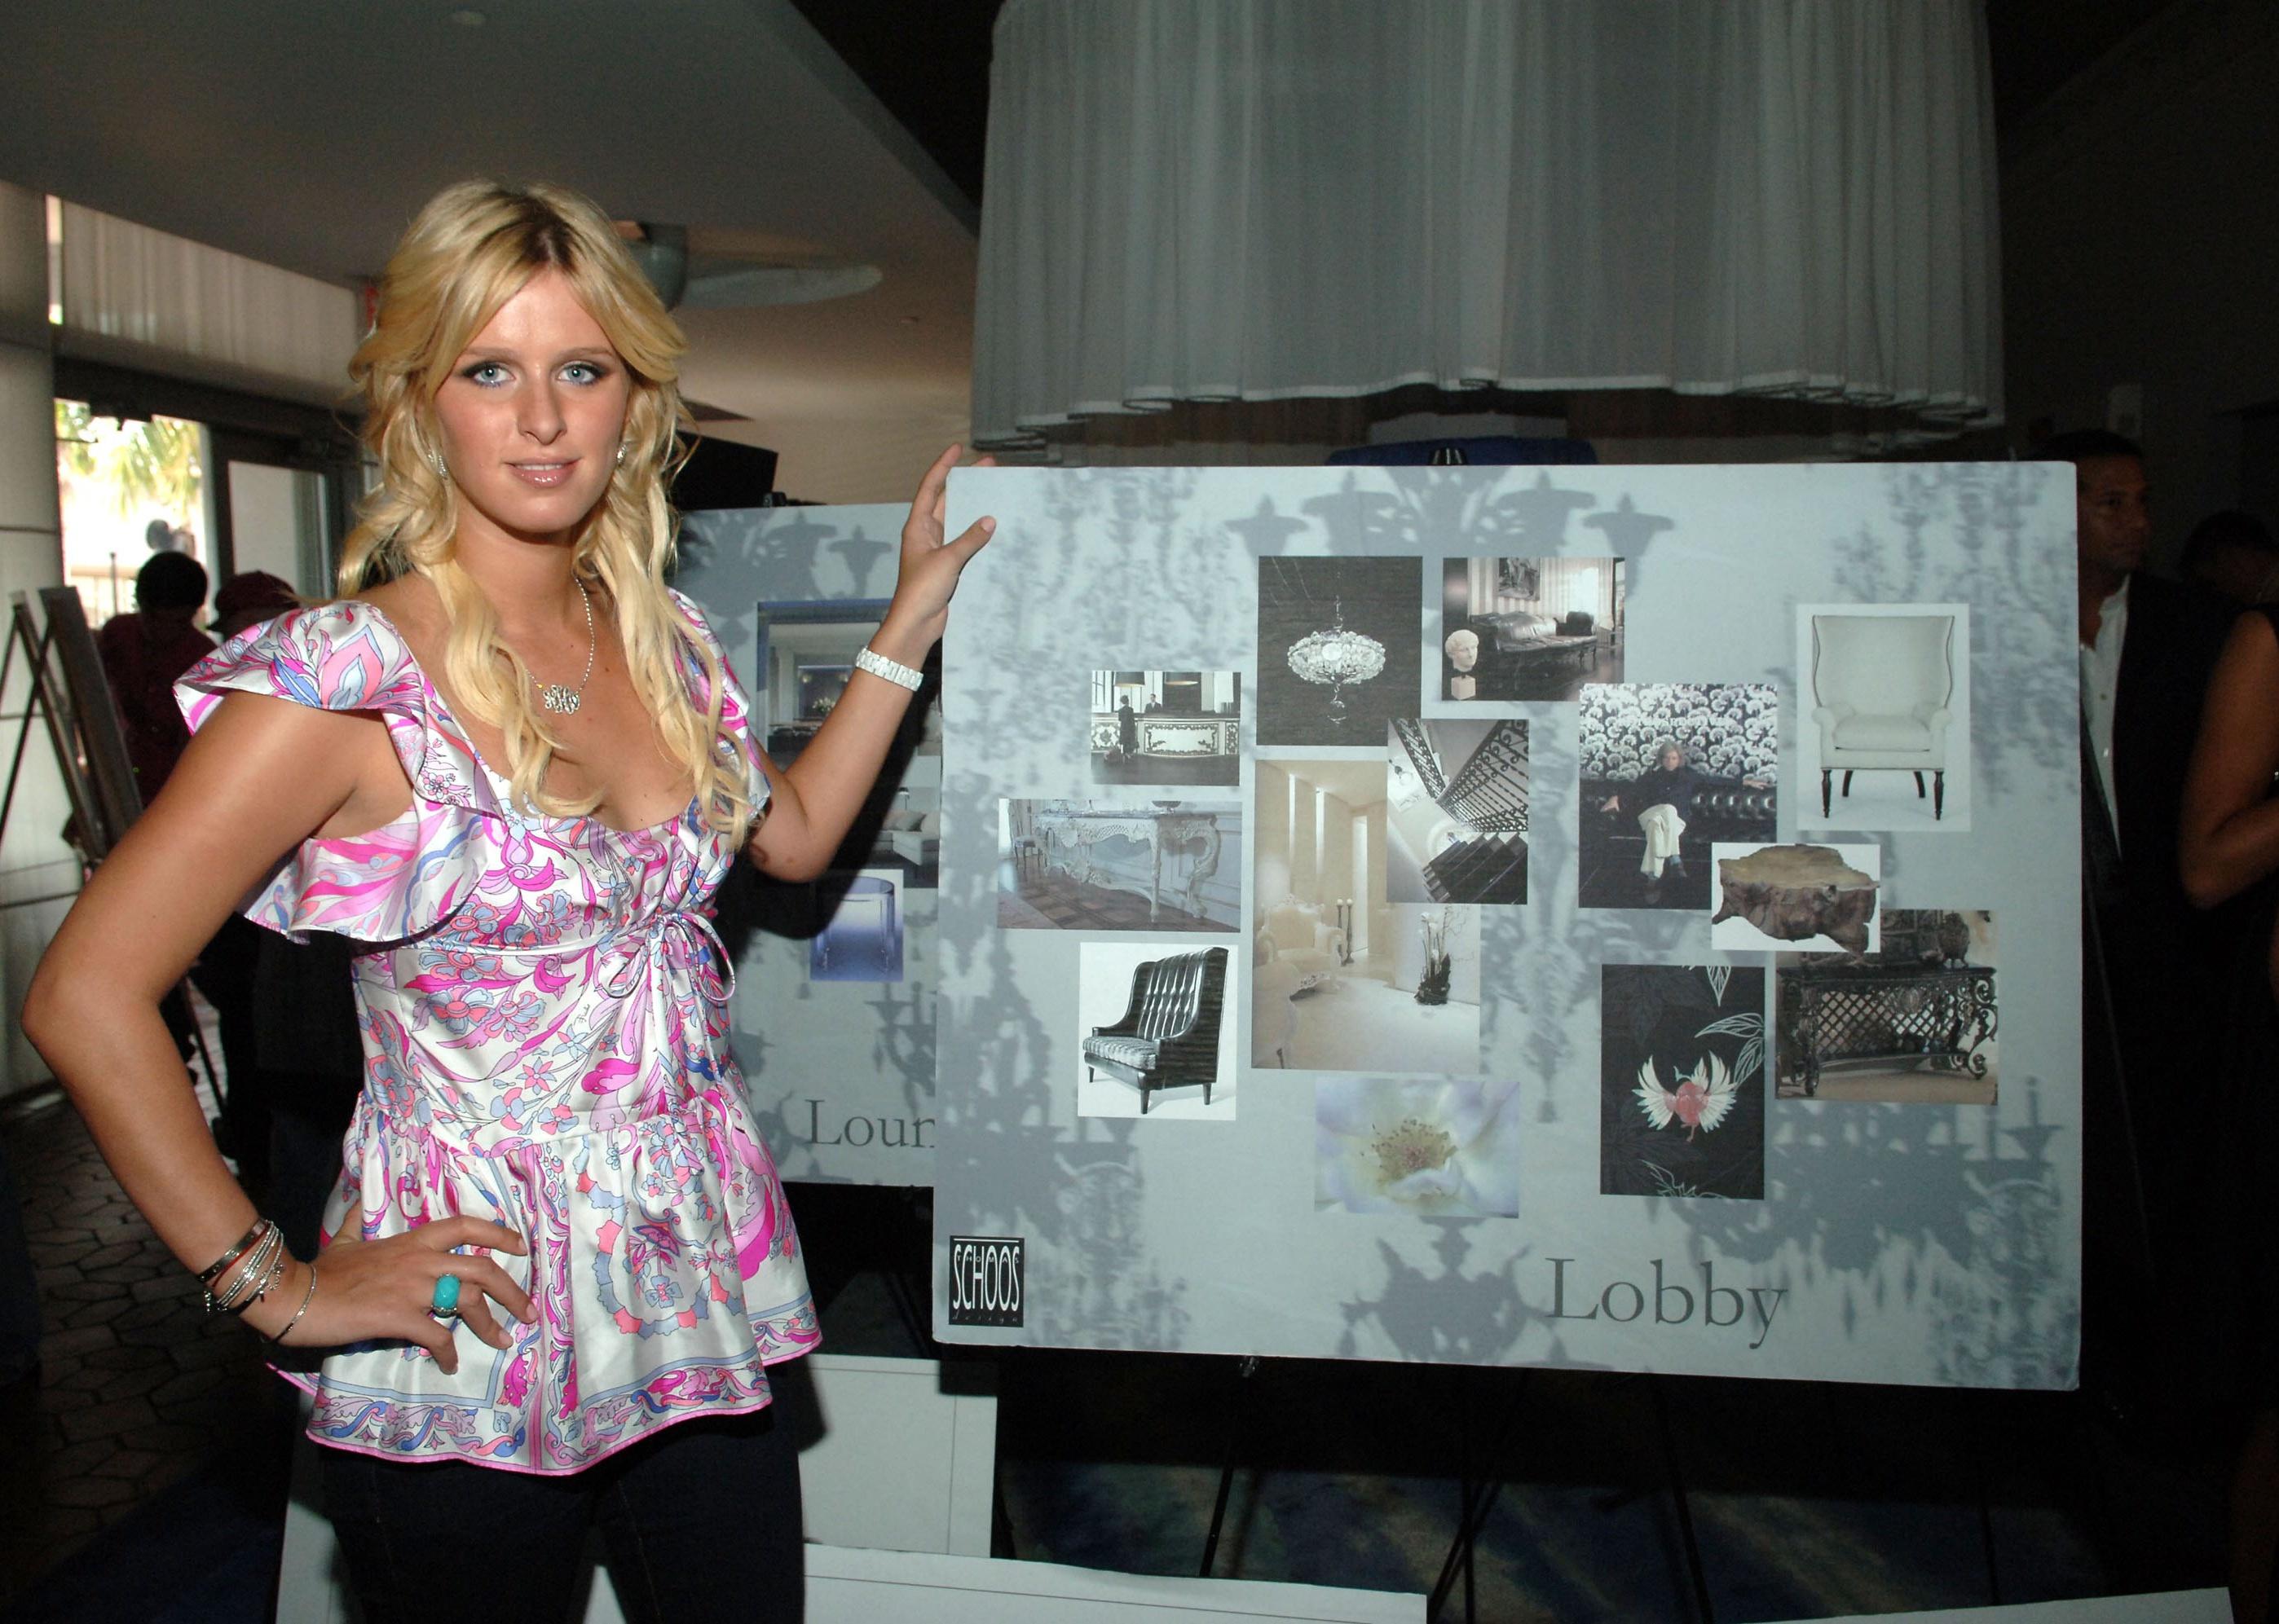 Nicky Hilton poses at the preview party for her South Beach hotel ''Nicky O''.